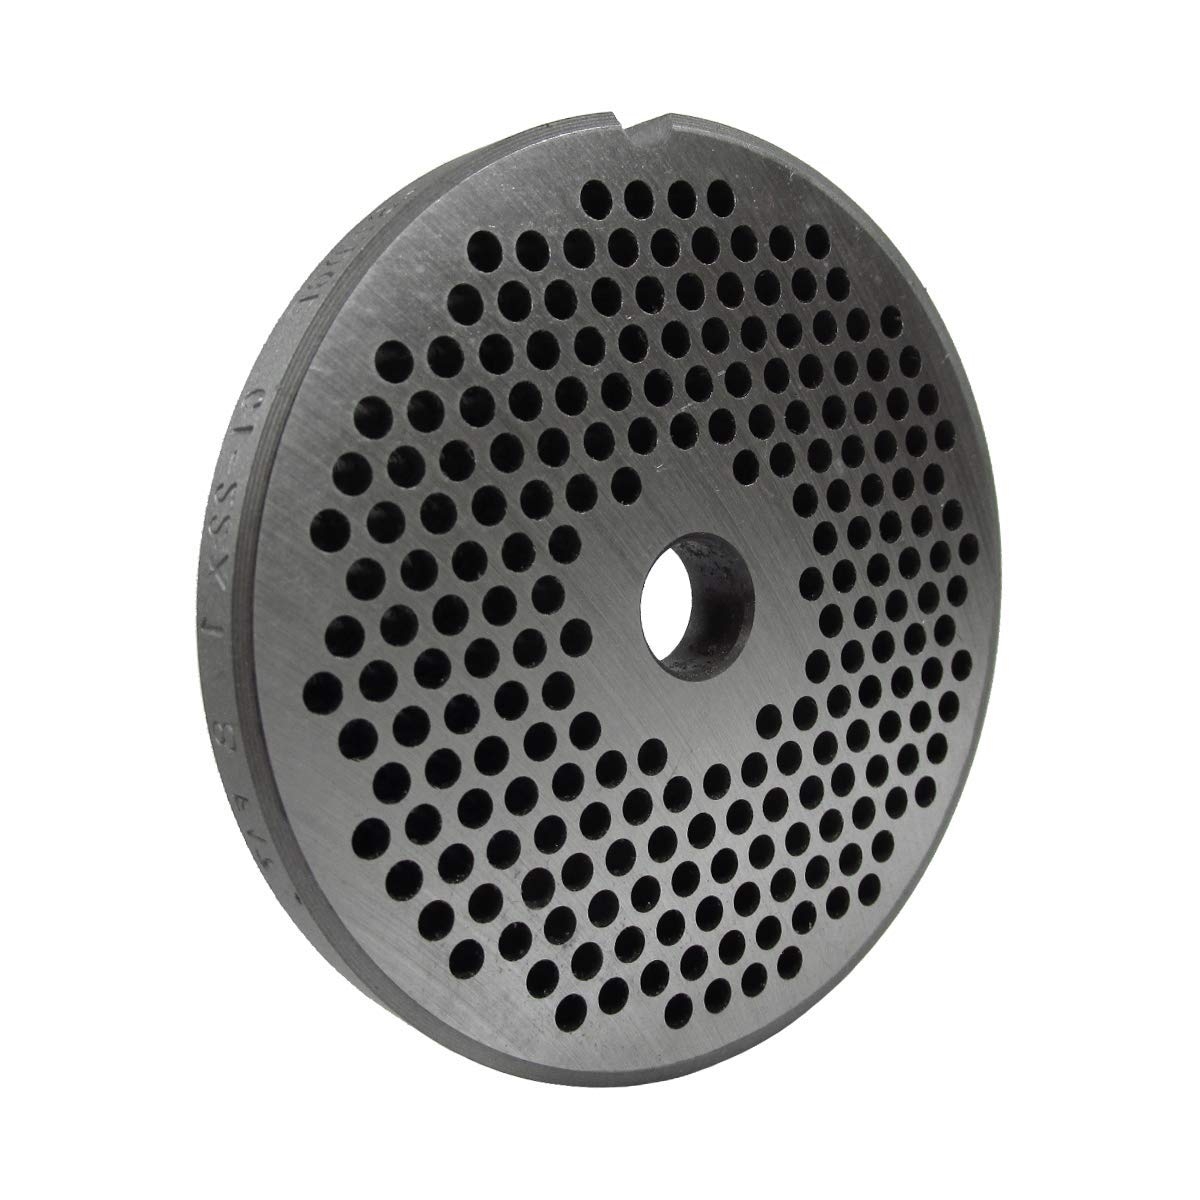 Grinder Plate for 22 Grinders, Hobart and Biro, with 1/8″ Holes Great for Hamburger Import To Shop ×Product customization